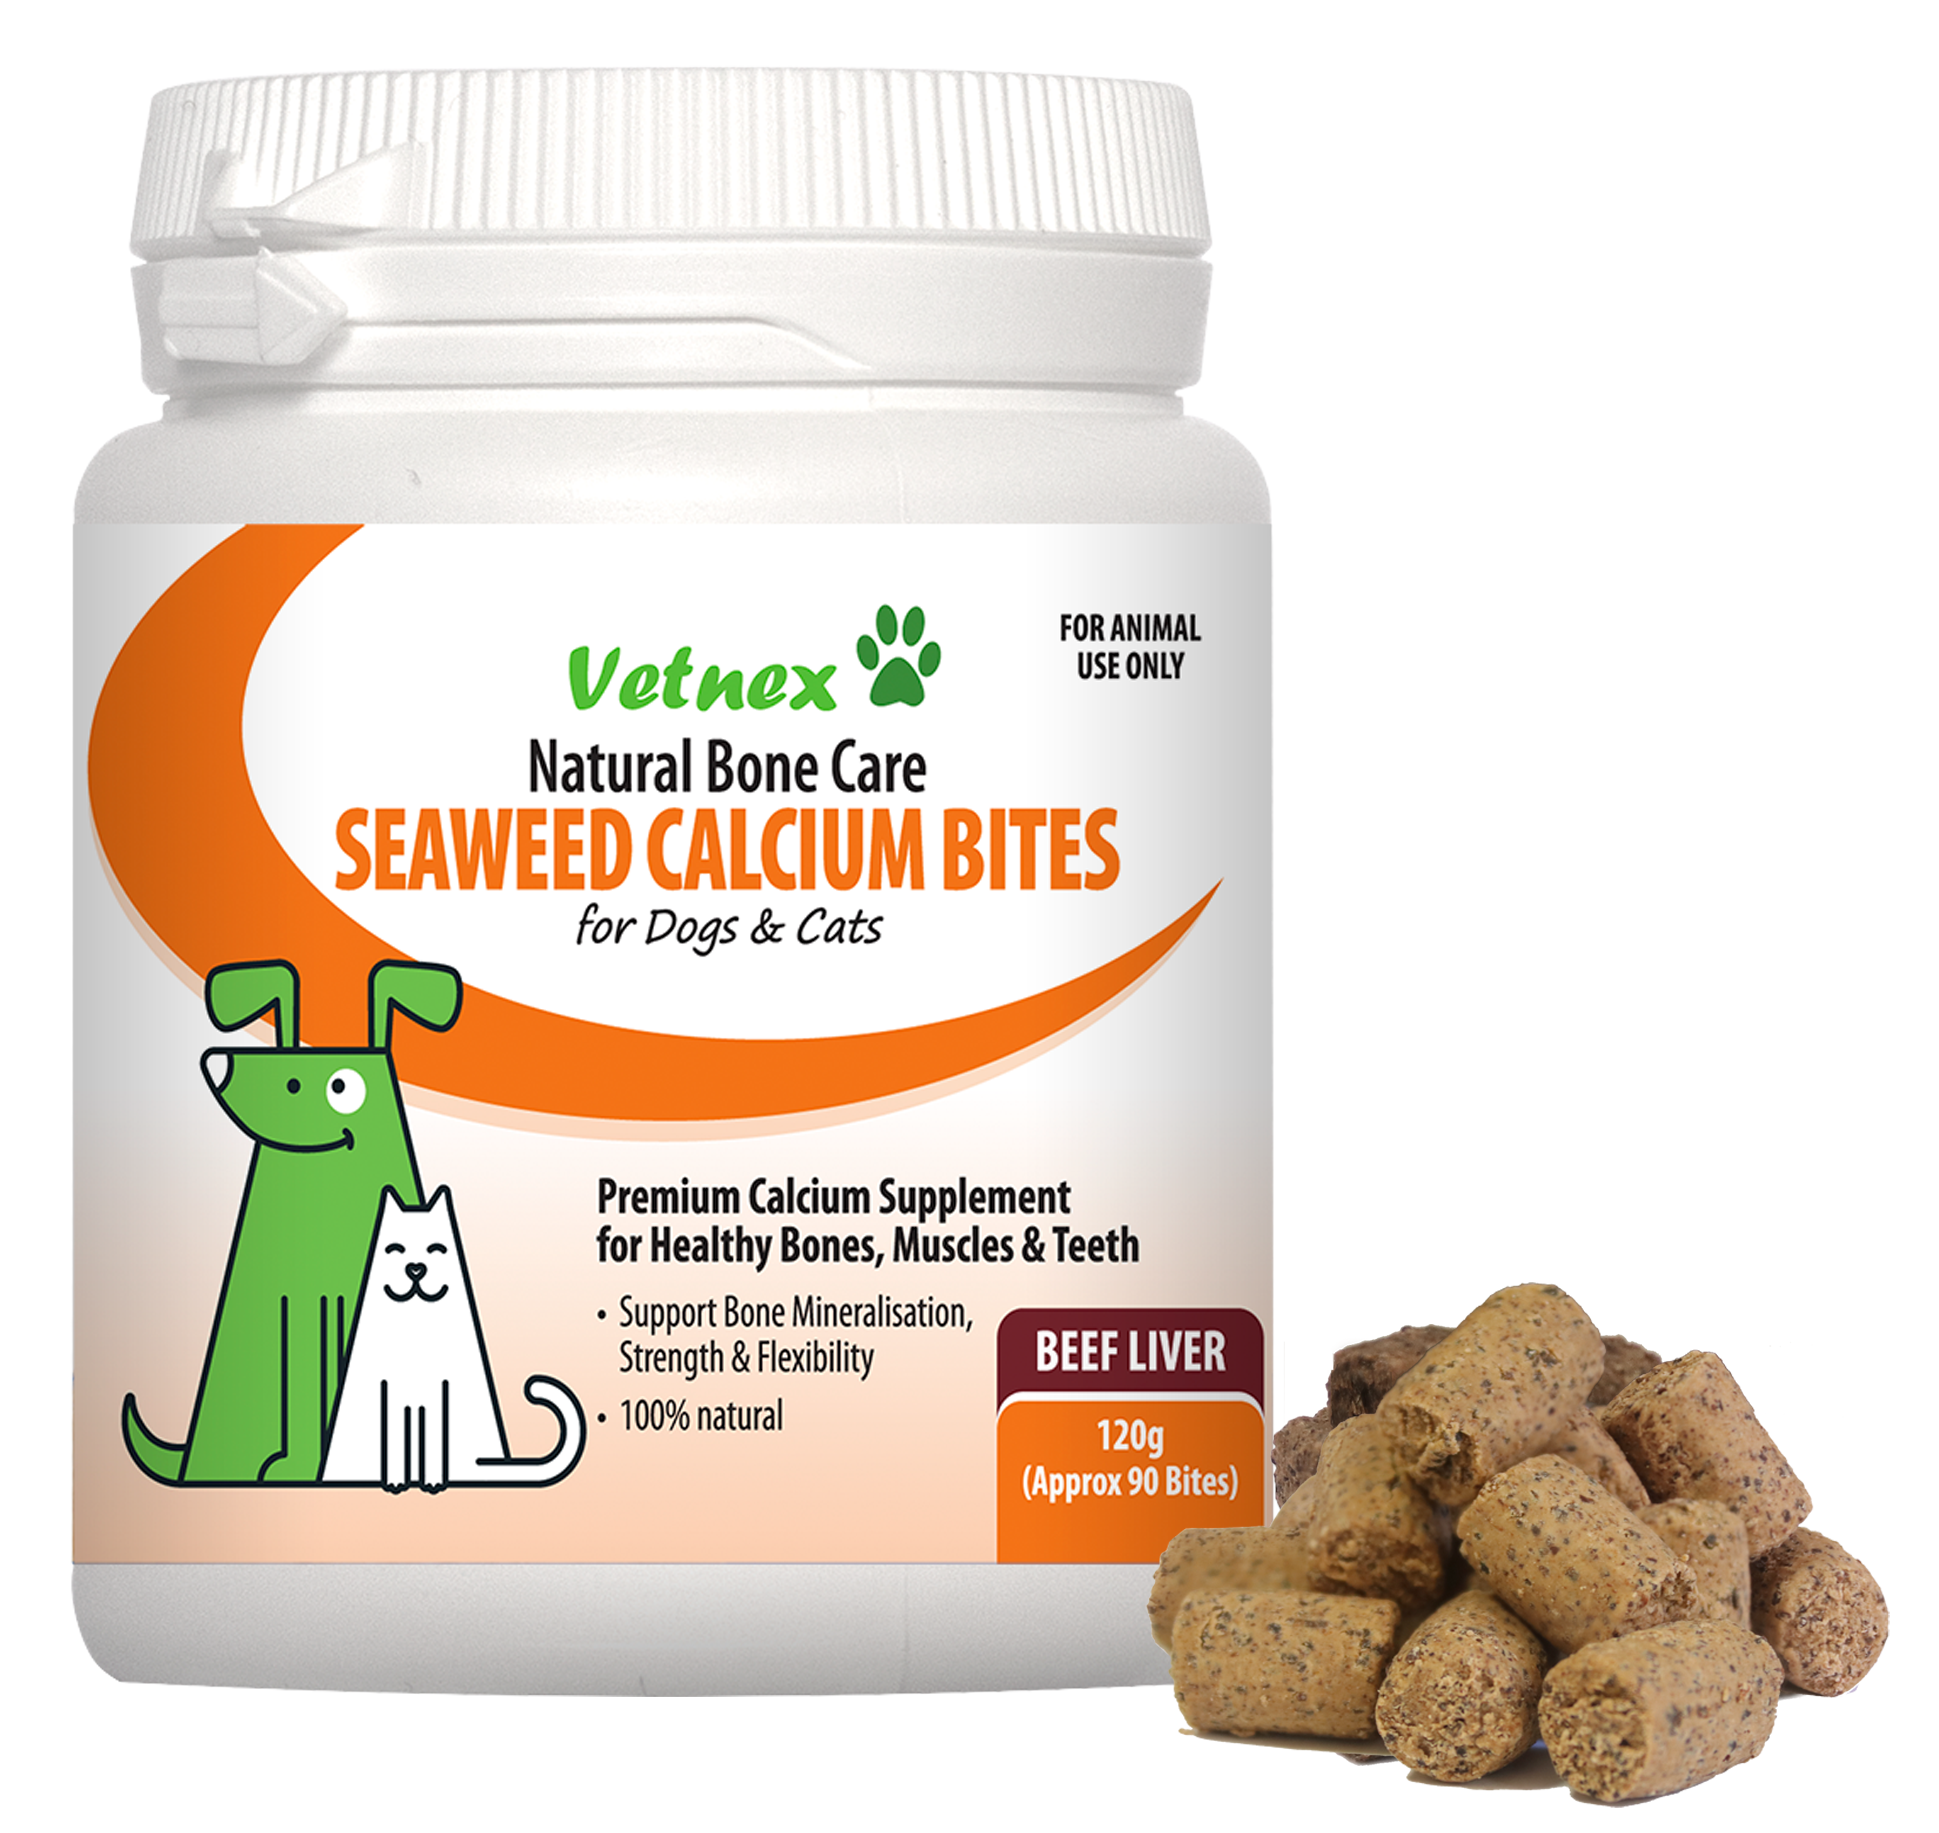 Vetnex Launched Seaweed Calcium Bites for Dogs & Cats